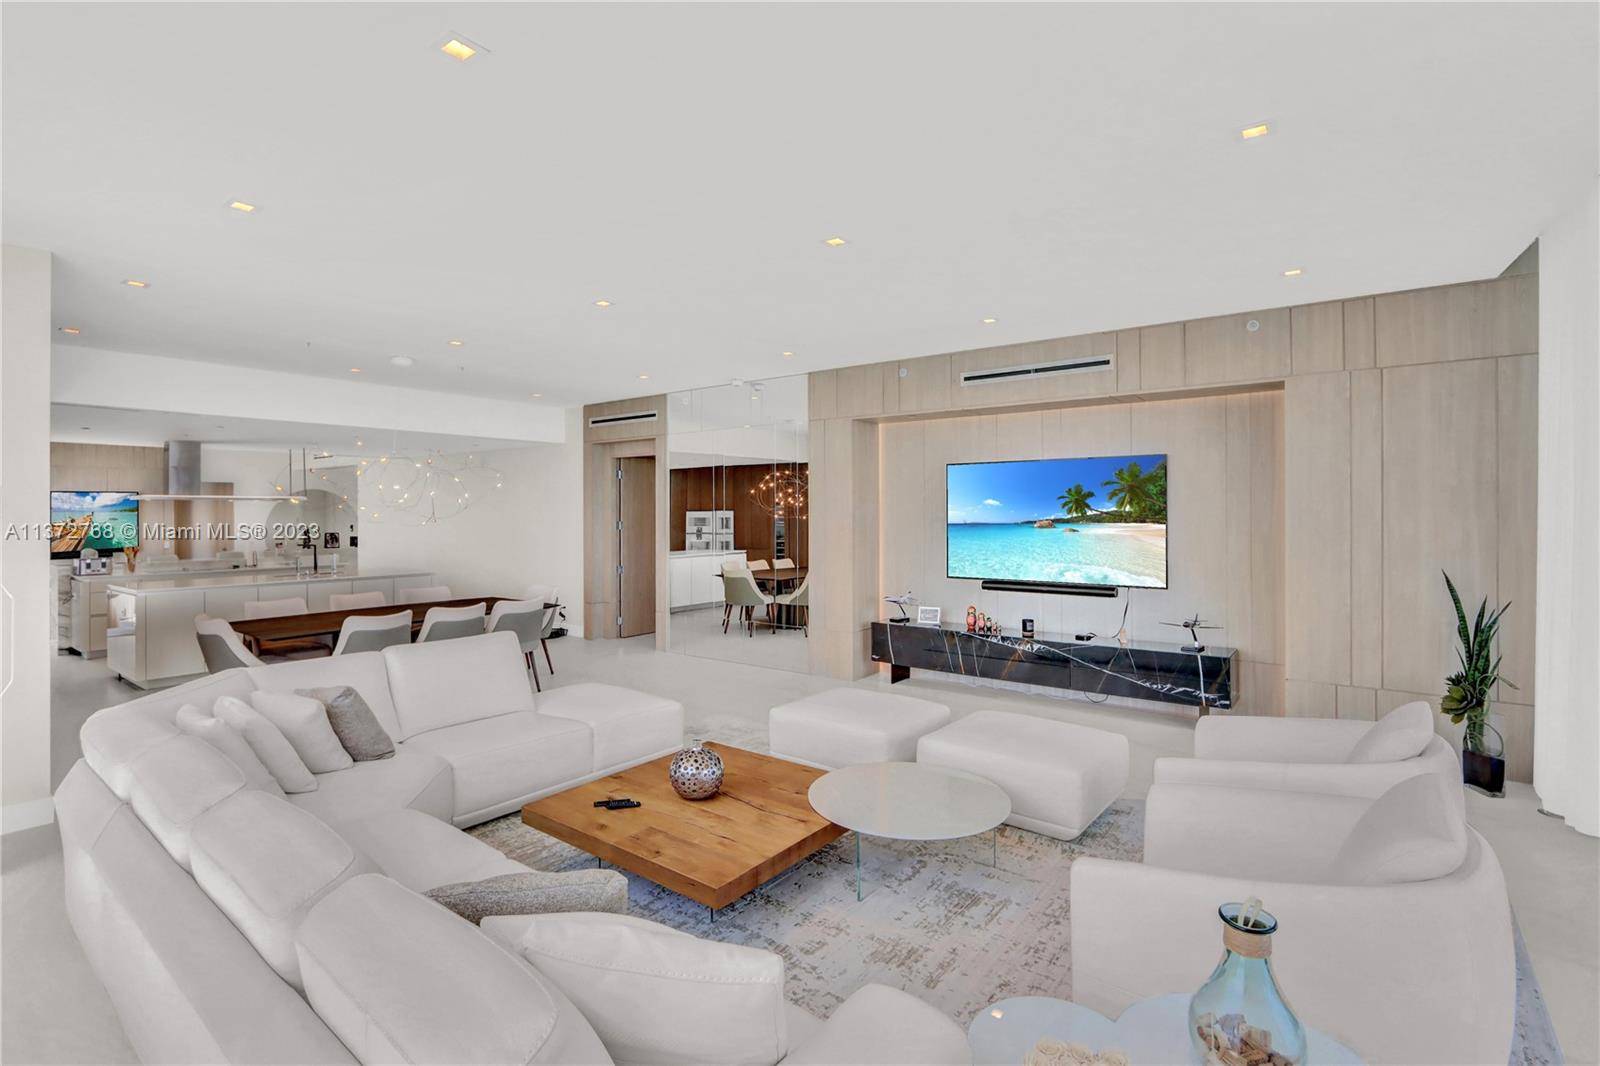 Spectacular residence showcasing a flawless contemporary design style exemplifying the ultimate Miami luxury lifestyle.